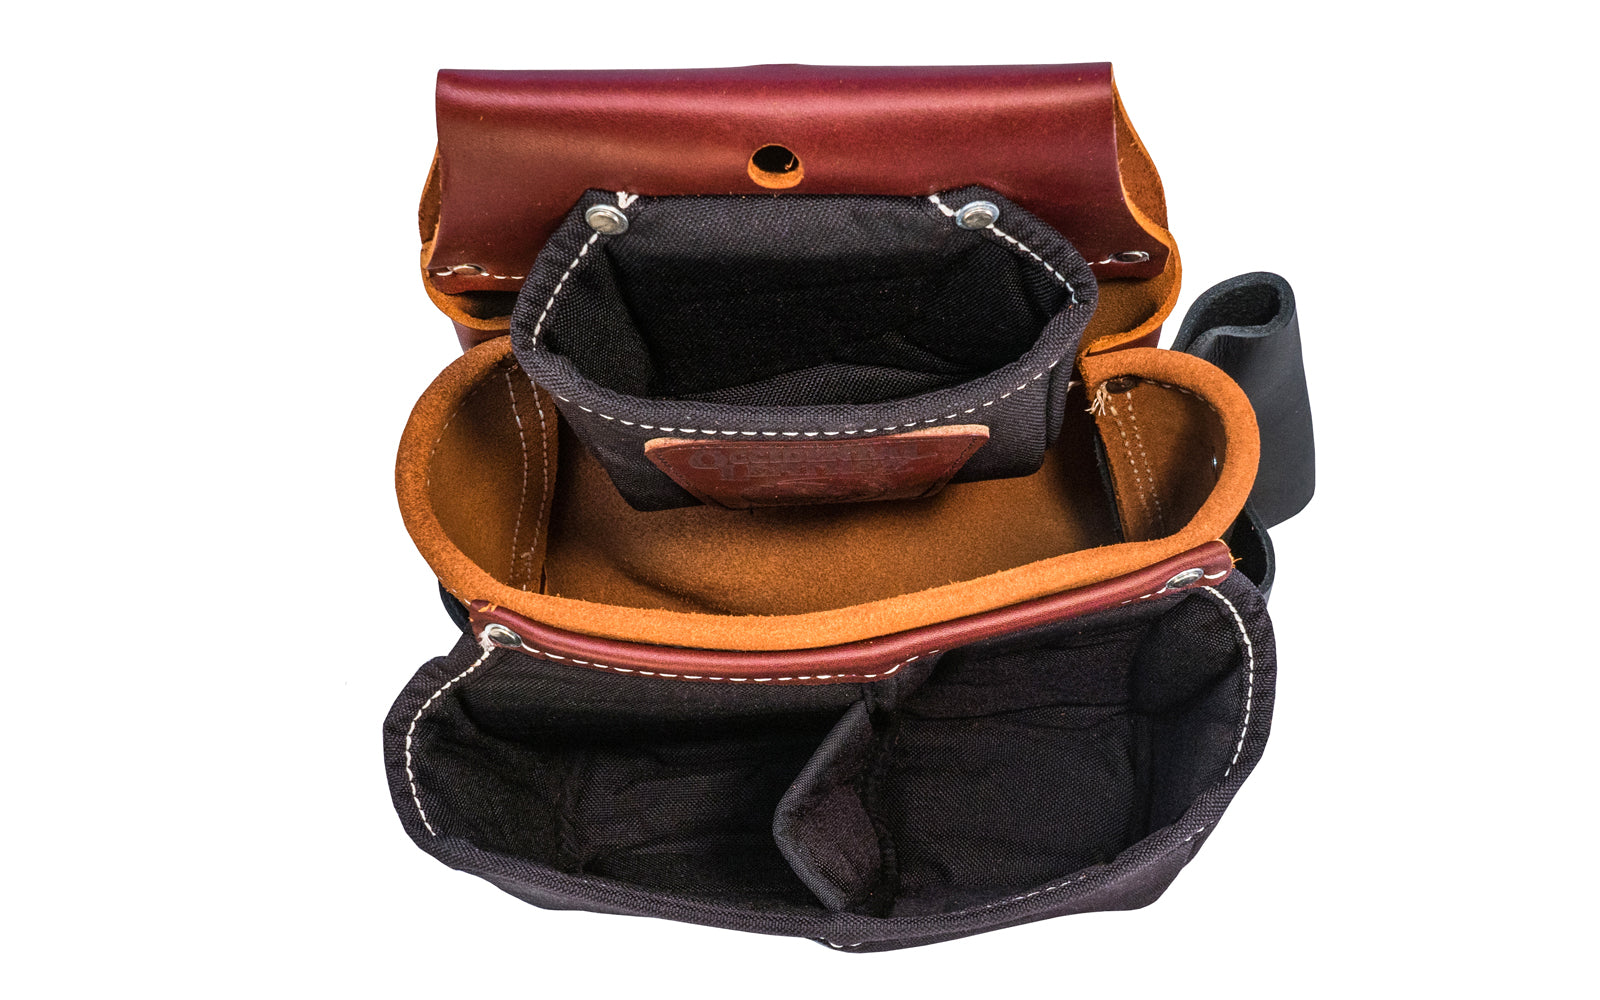 Occidental Leather ~ Model 5564 - Fits a 3" work belt - Occidental Leather's Belt worn fastener bag with industrial nylon dual compartment outer pouch. Six tool holders & Four pouches total. Room for wire nuts, conduit couplers, & other fittings. Black leather tool holders. Nylon & genuine Leather - 759244280500